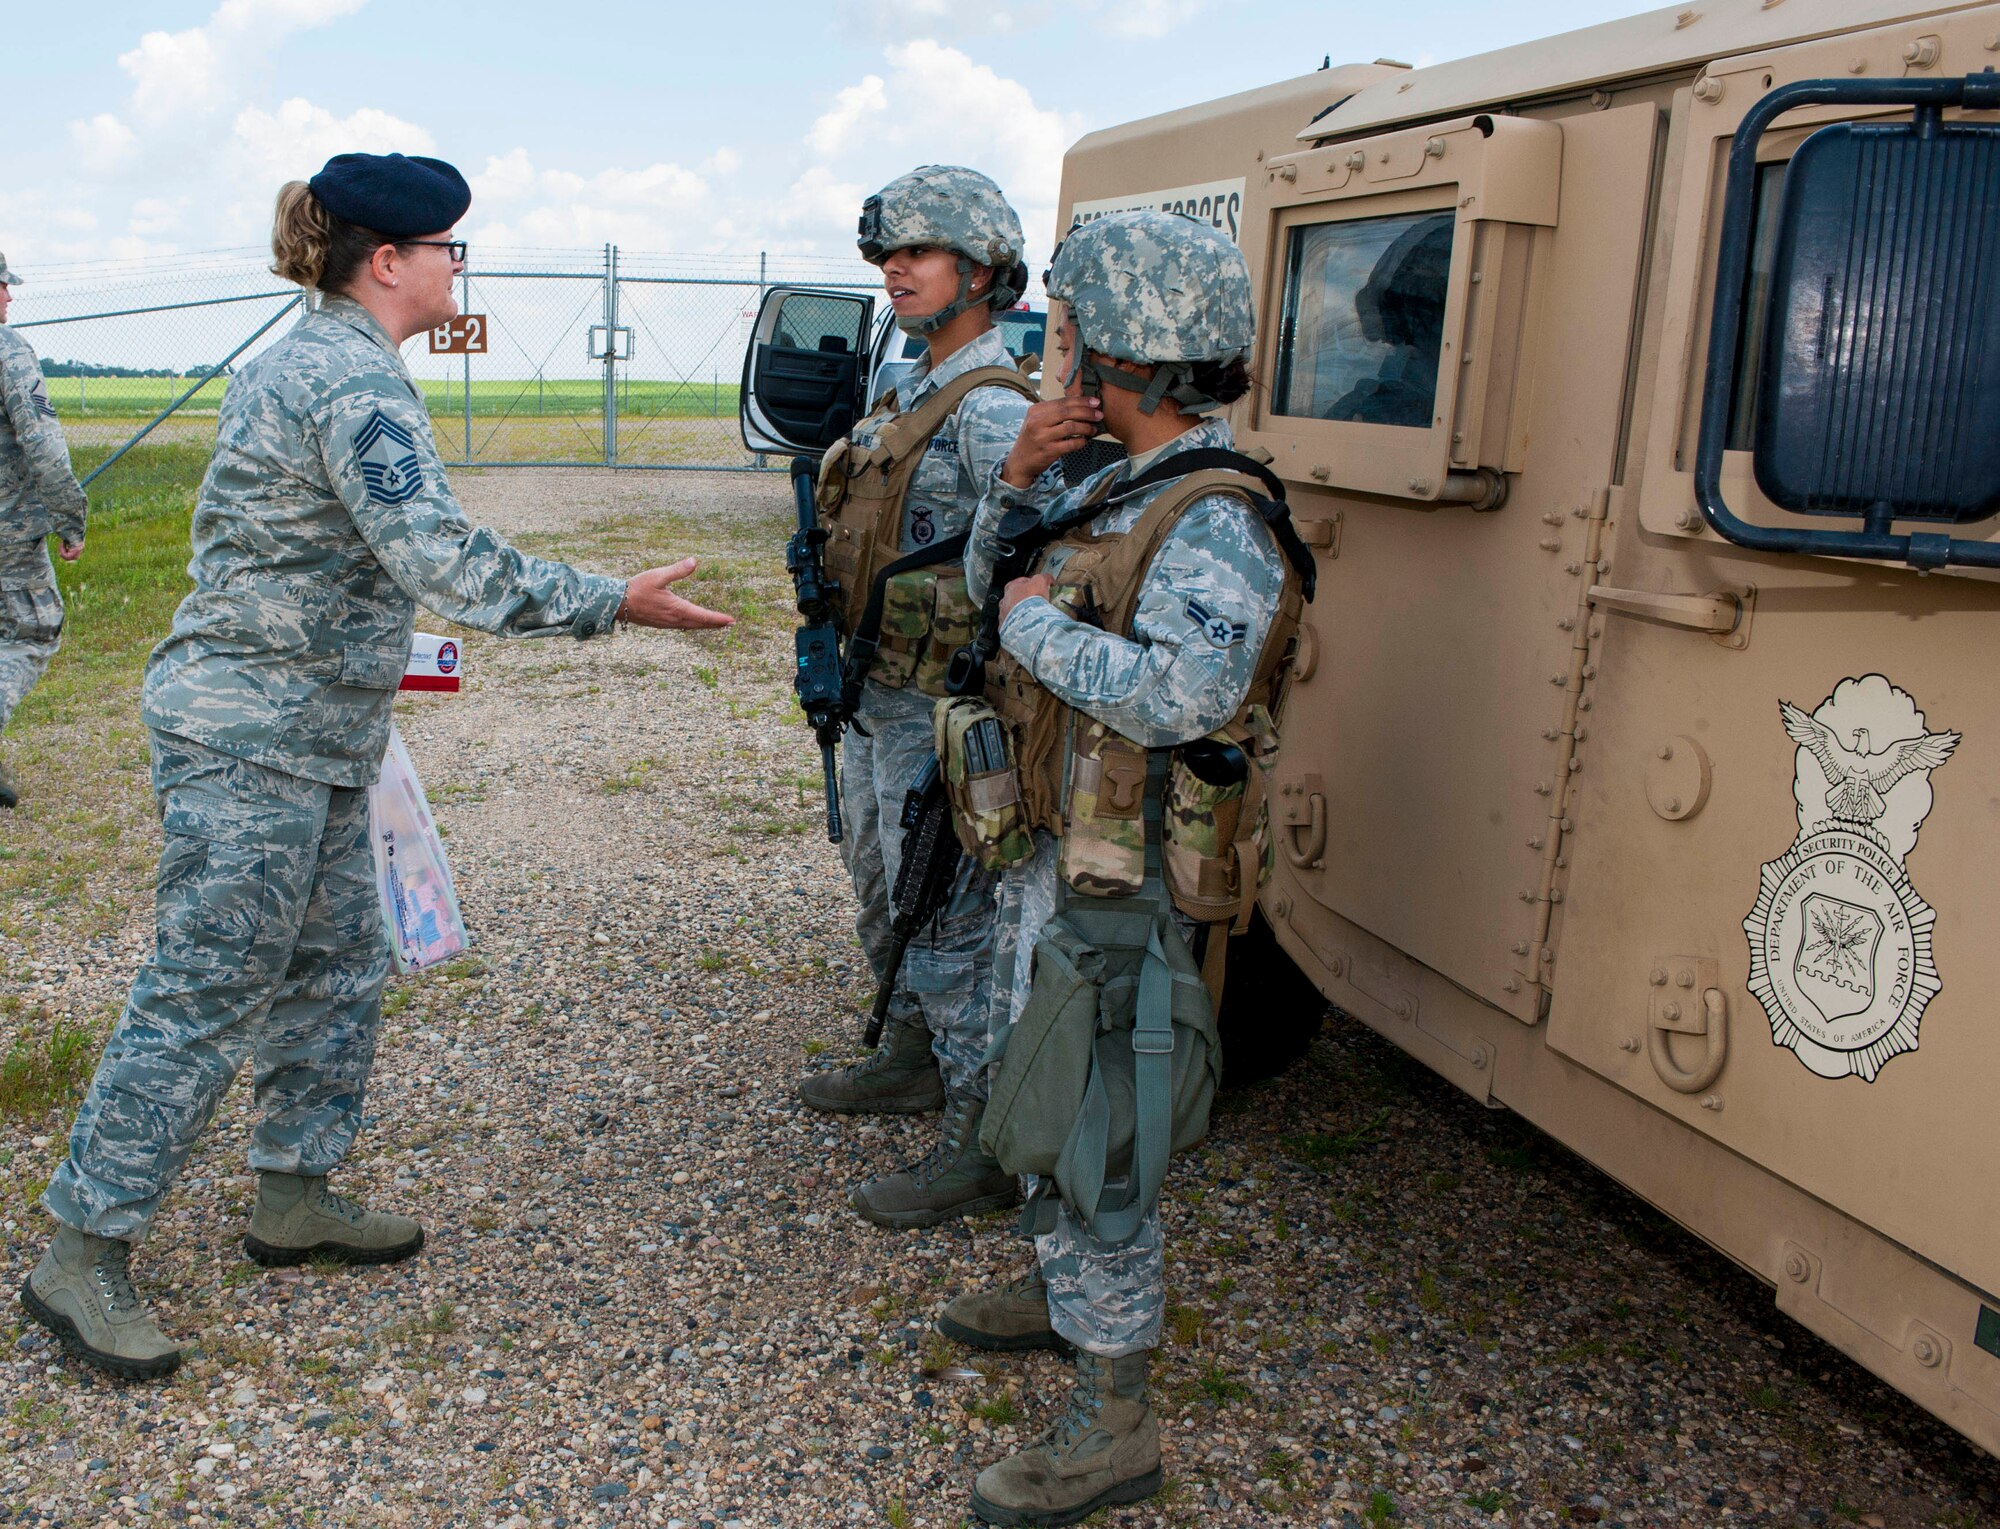 Chief Master Sgt. Melissa Permar, 791st Missile Security Forces Squadron security forces manager, speaks with Airmen from the 791st MSFS, during a morale visit to the missile complex in North Dakota, July 30, 2014. Permar covered approximately 210 miles and stopped at several launch facilities in the missile complex during the visit. (U.S. Air Force photo/Senior Airman Stephanie Morris)